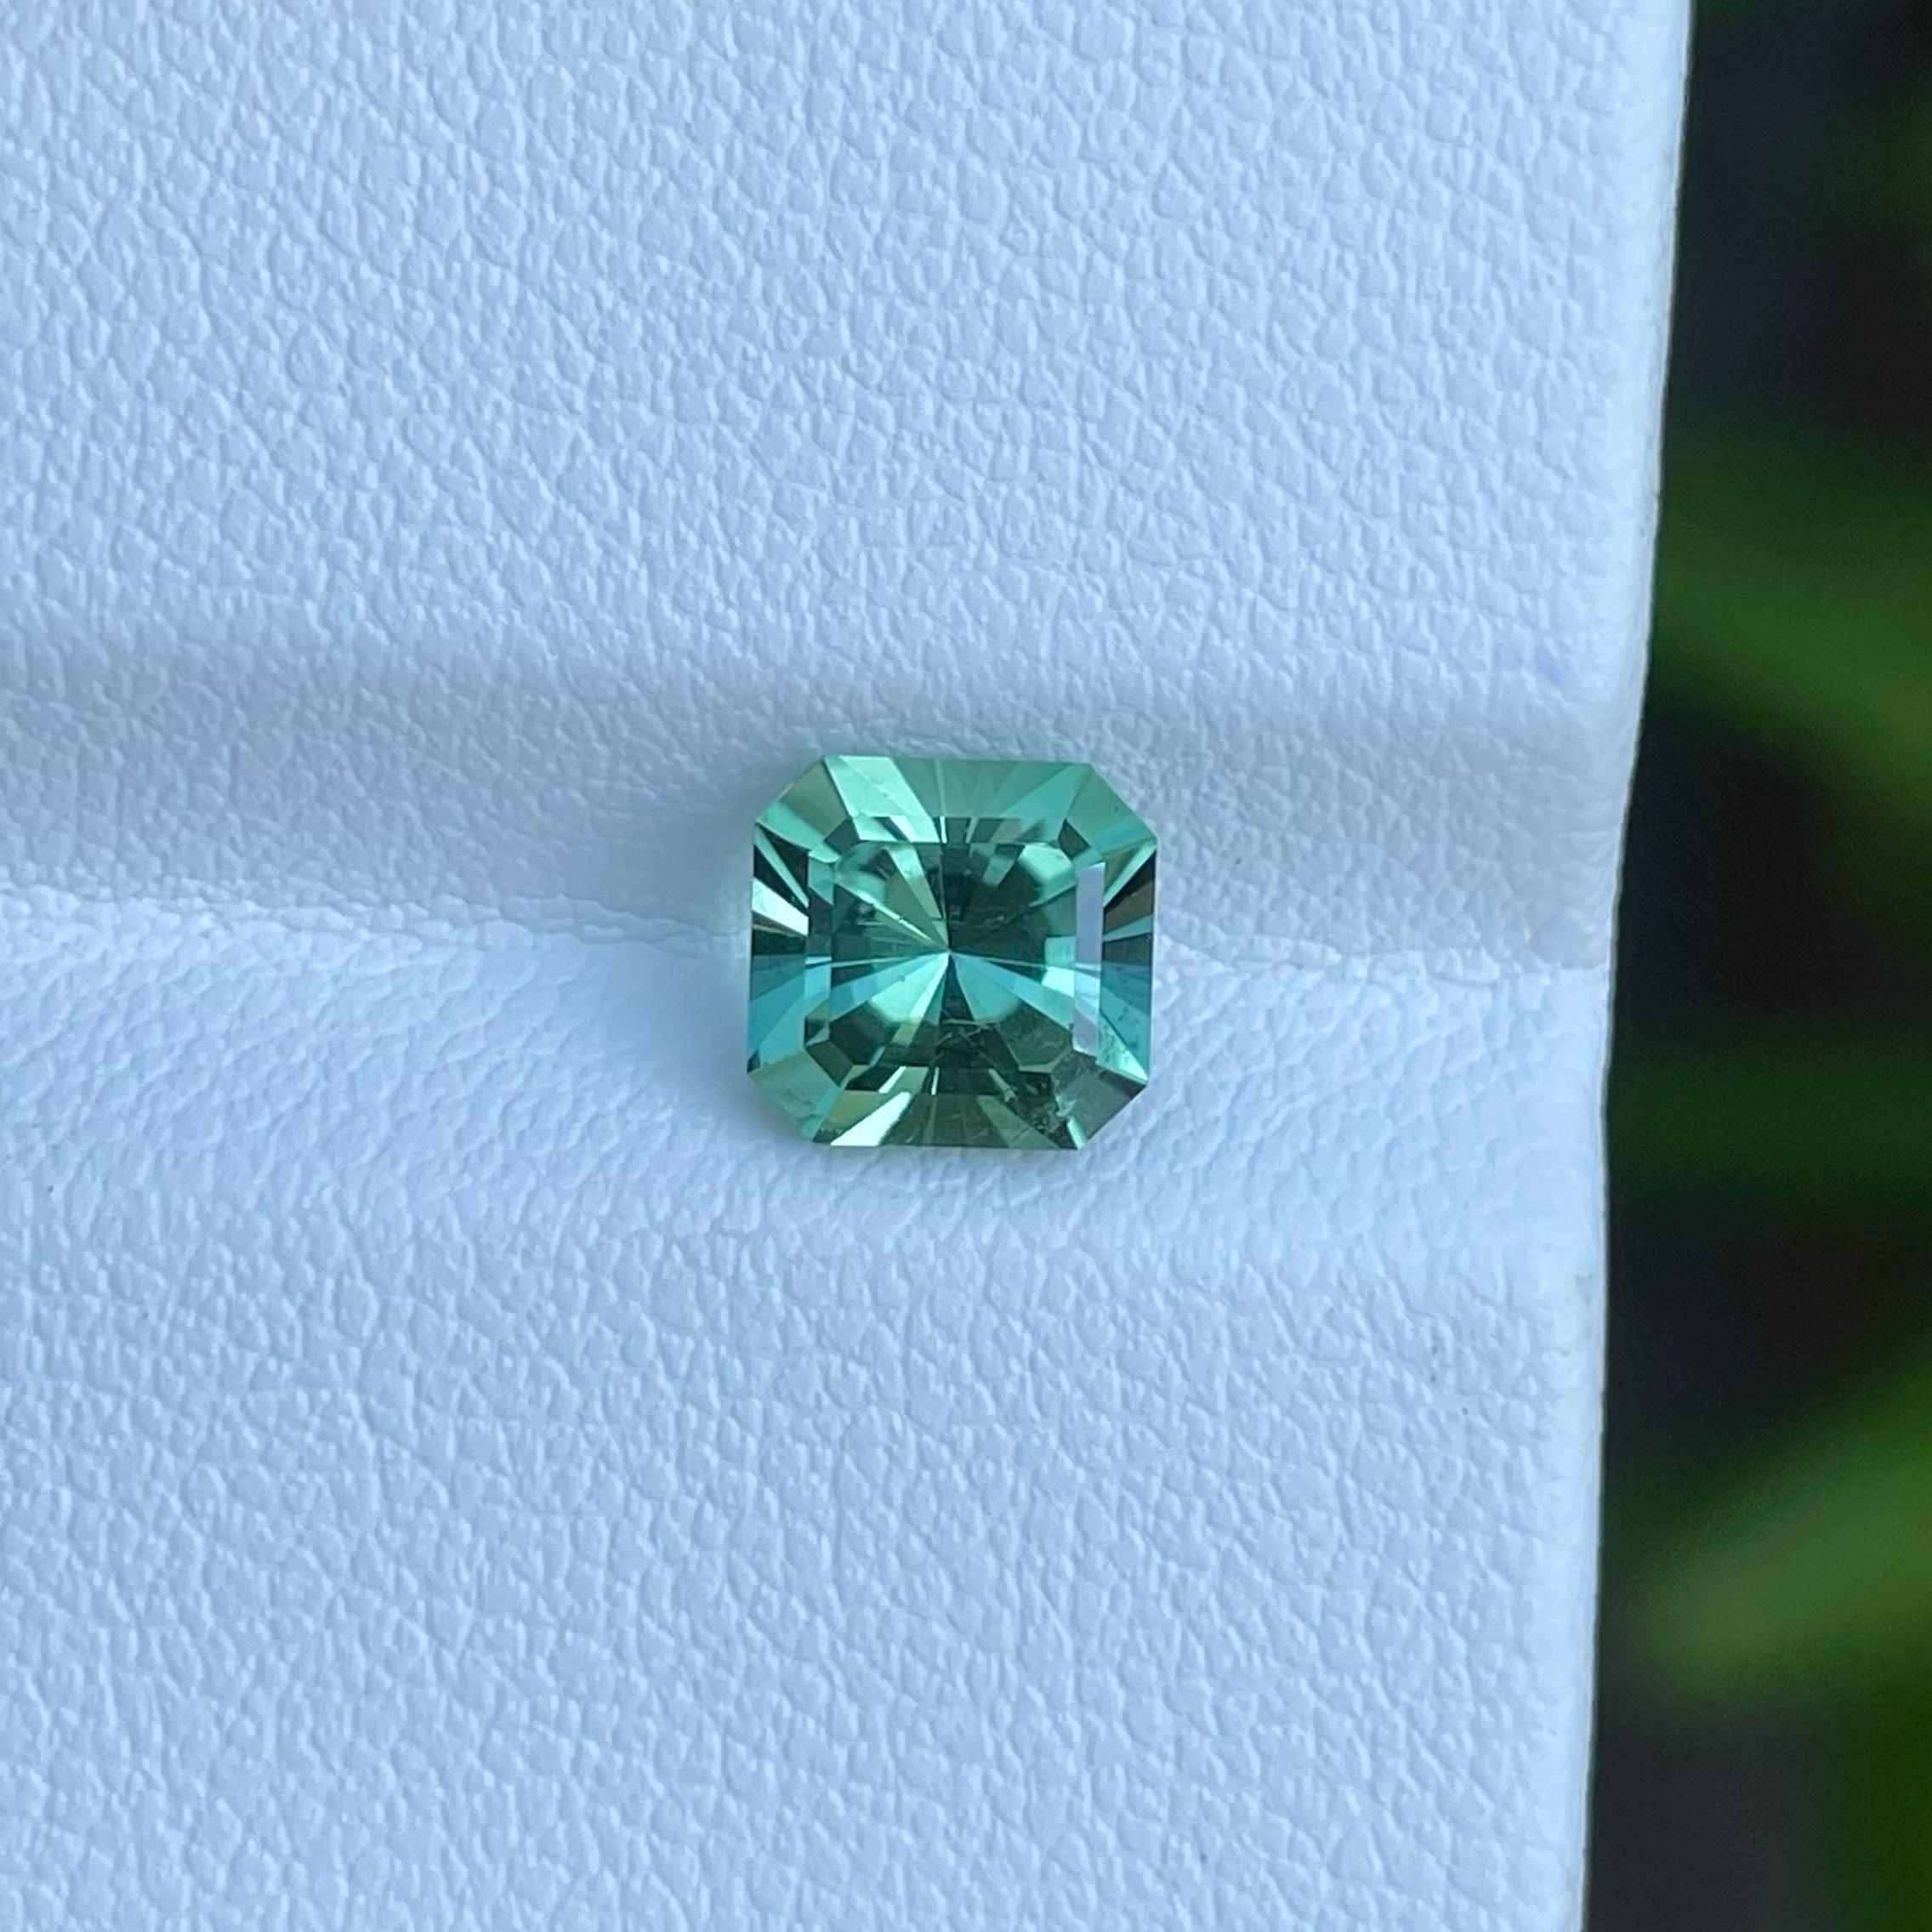 Greenish Blue Fancy Cut Tourmaline Gem, Available For Sale At Wholesale Price Natural High Quality 1.65 Carats SI Clarity Untreated Tourmaline From Afghanistan.

Product Information:
GEMSTONE TYPE:	Greenish Blue Fancy Cut Tourmaline Gem
WEIGHT:	1.65